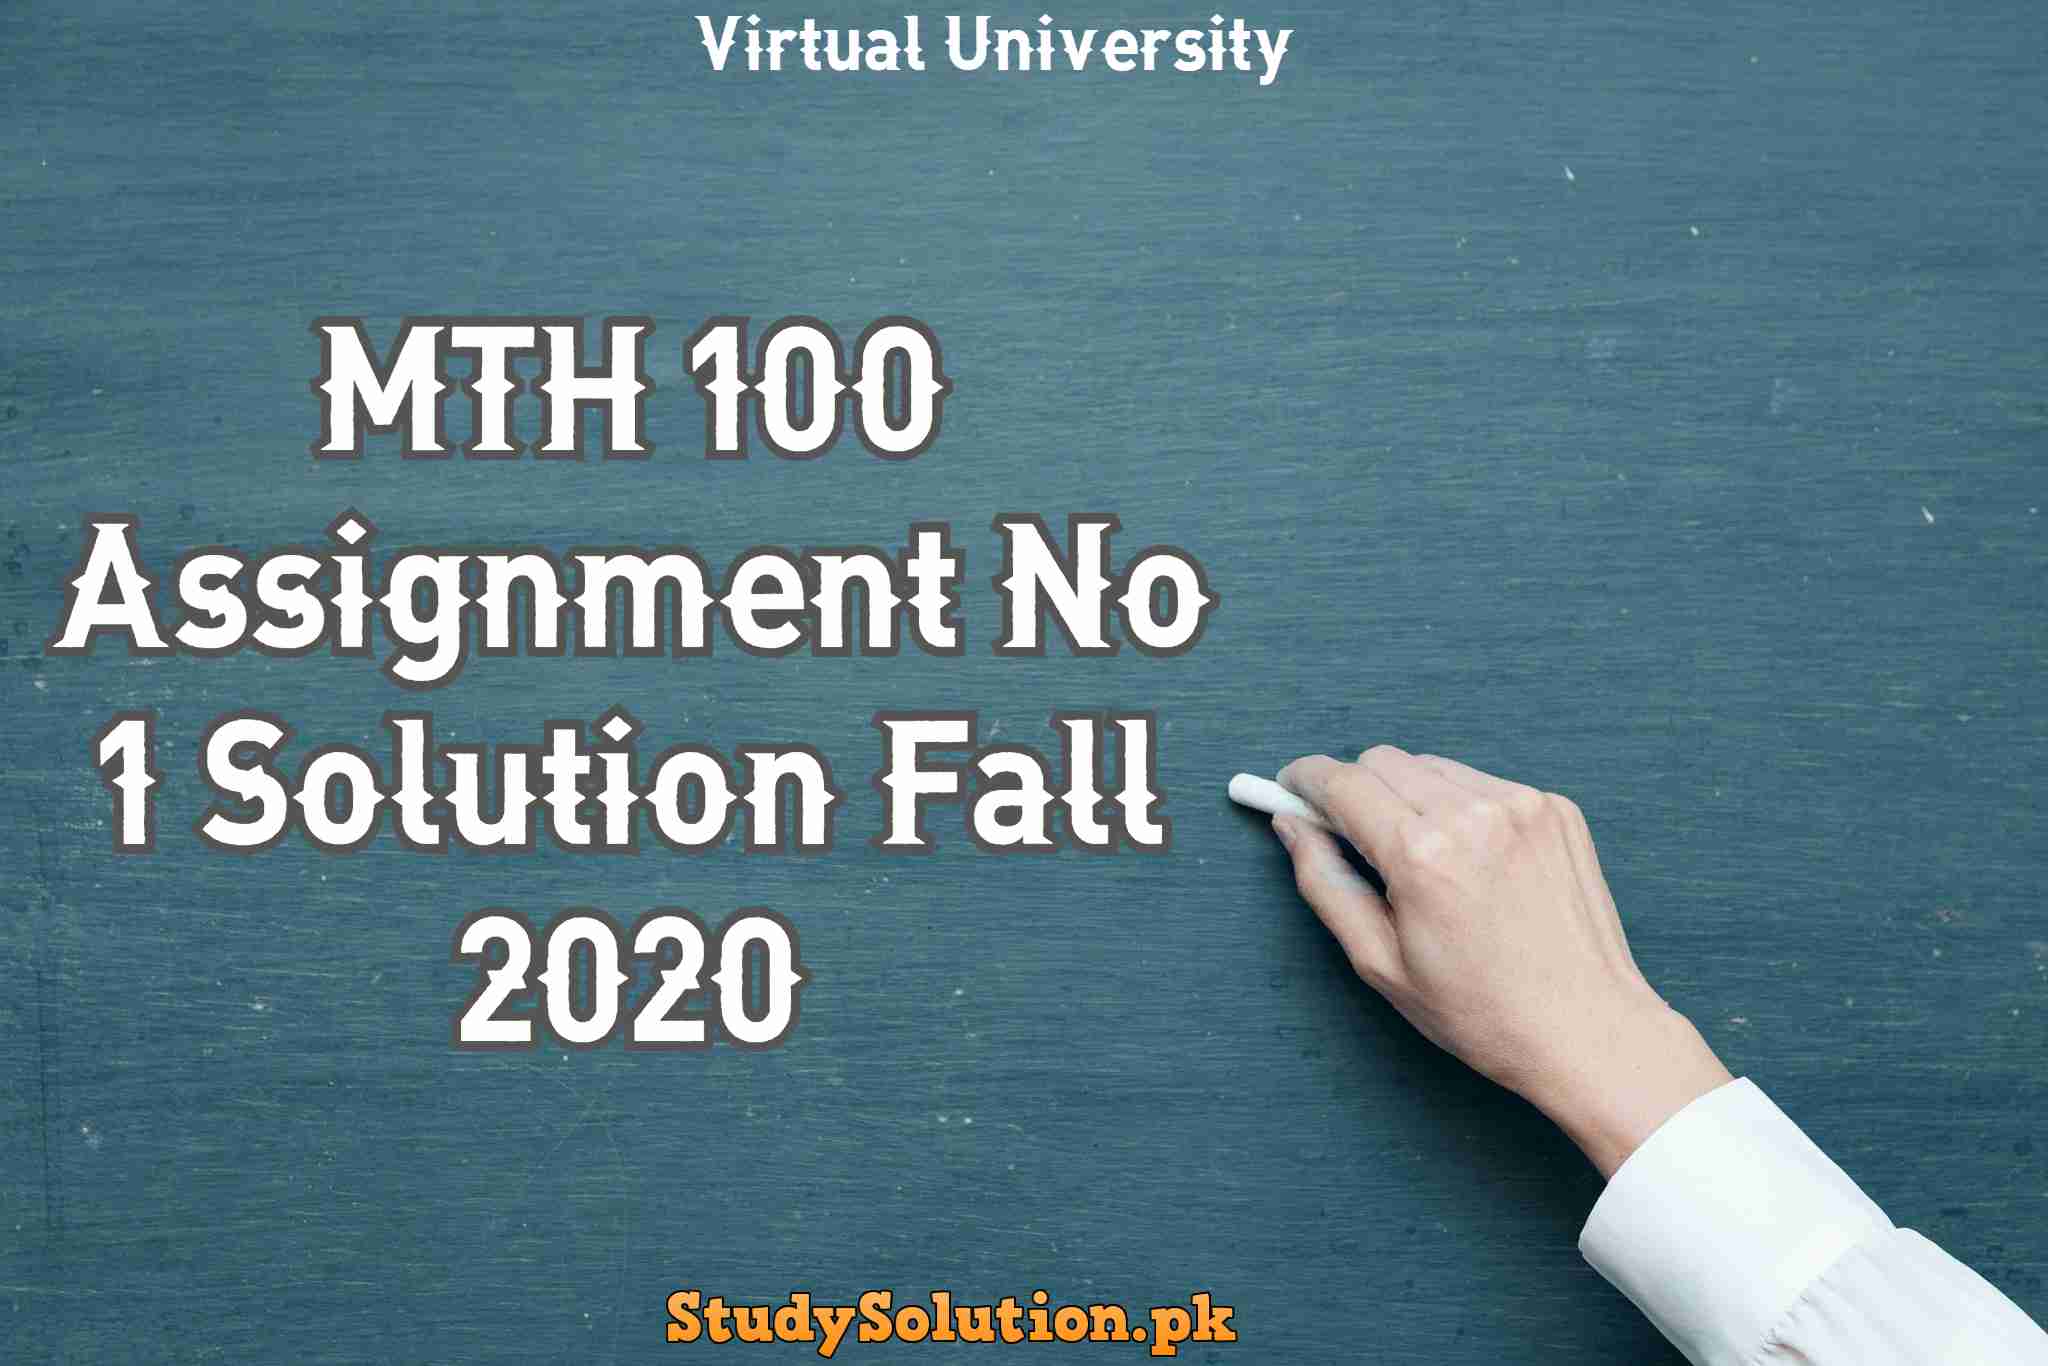 MTH 100 Assignment No 1 Solution Fall 2020